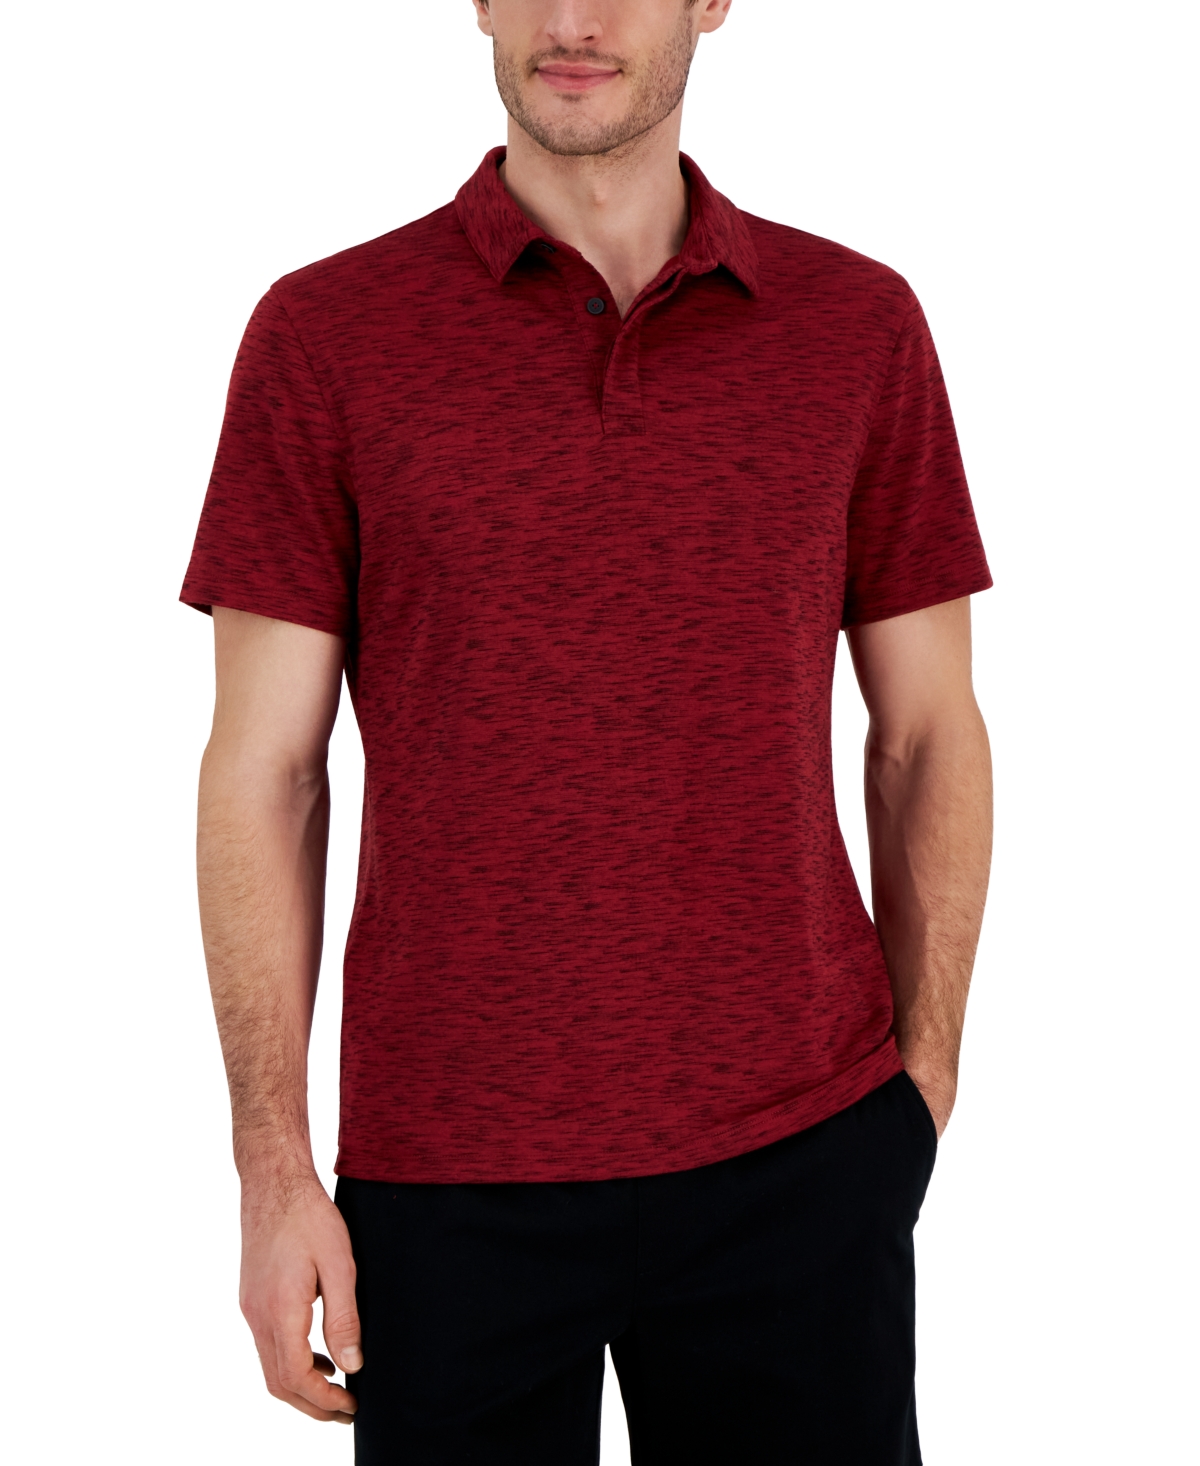 Alfatech Short Sleeve Marled Polo Shirt, Created for Macy's - Clay Red Combo